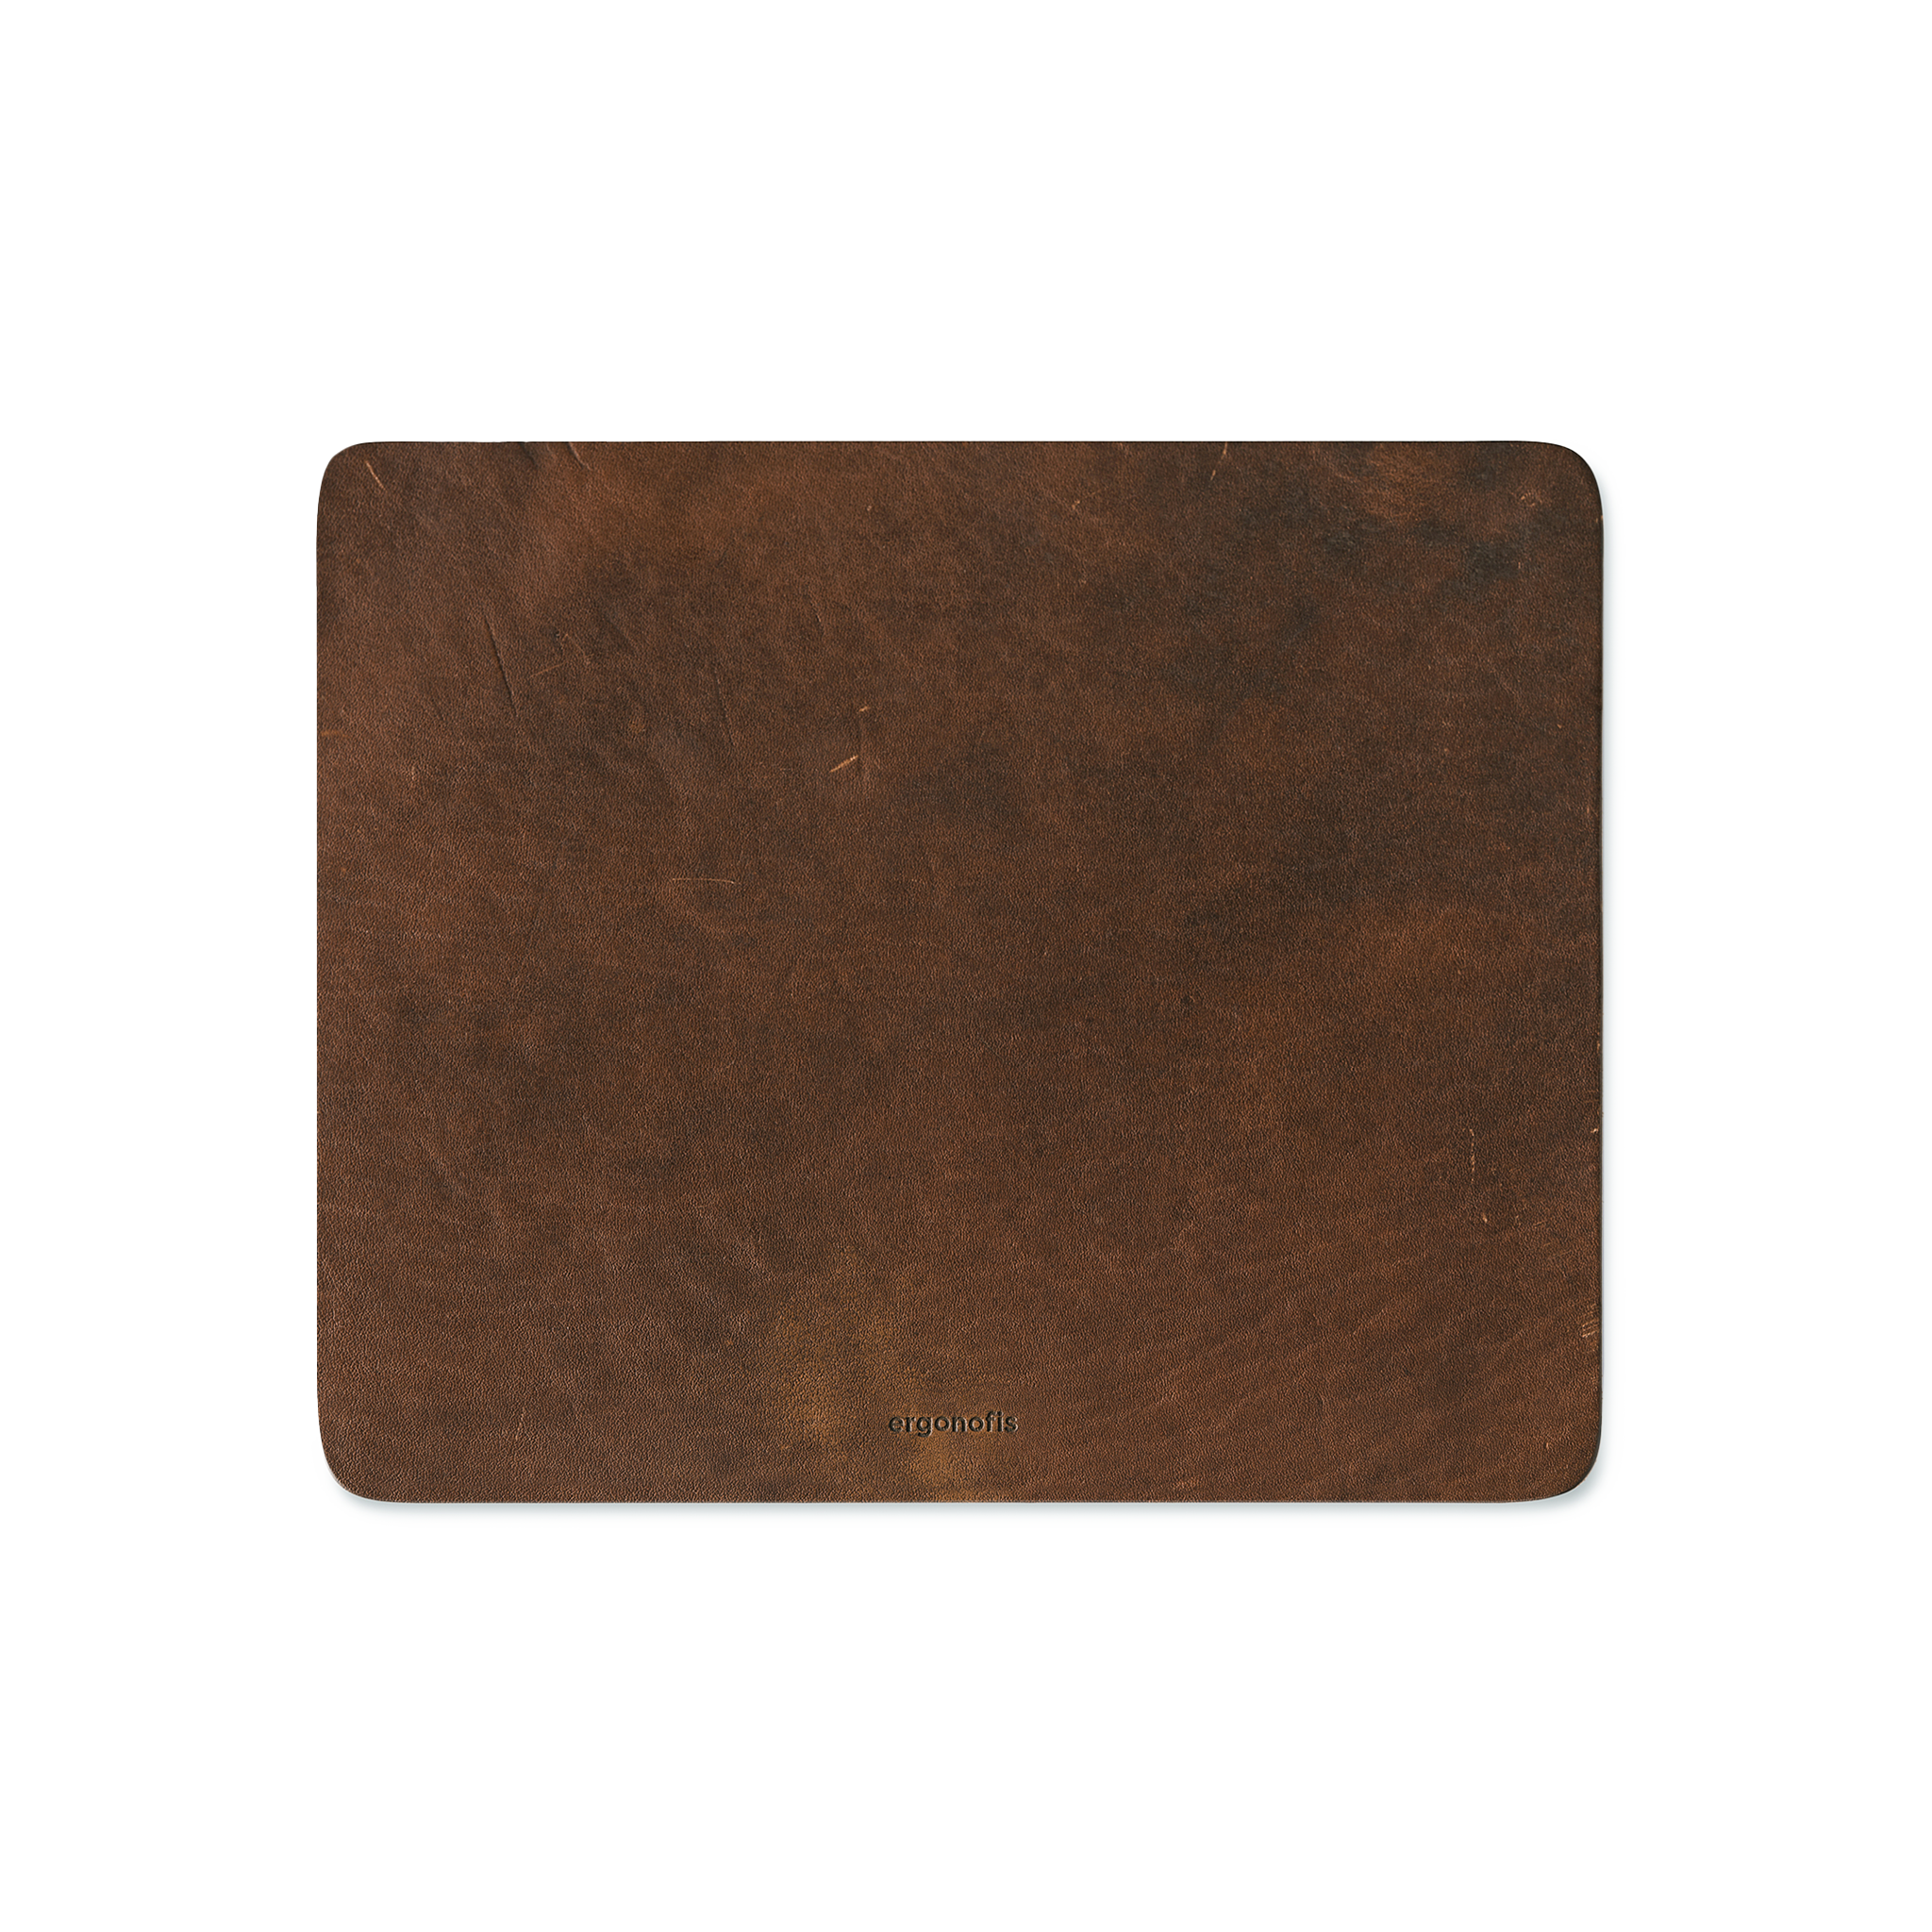 Almost Perfect Leather mouse pad - Hazelnut - Brun